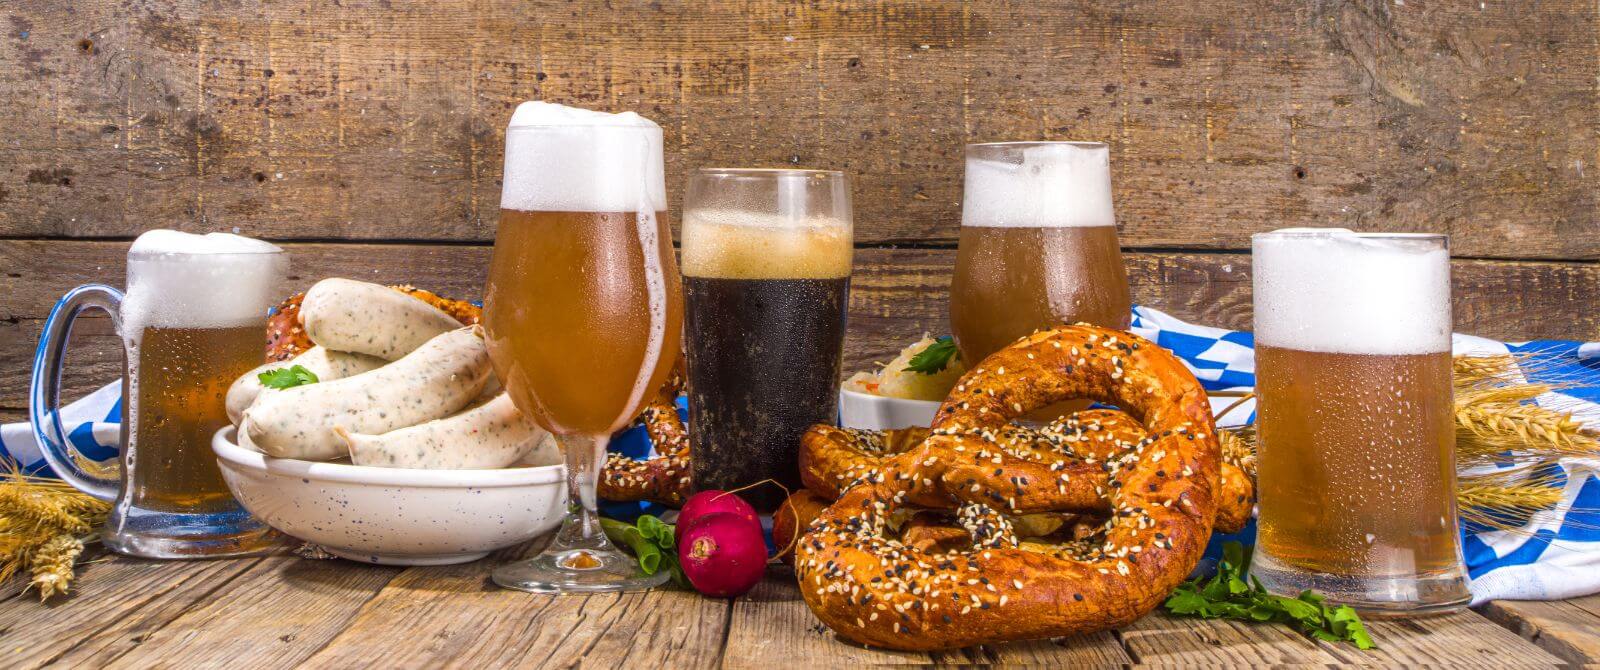 a large soft pretzel and beer with a plate of sausages